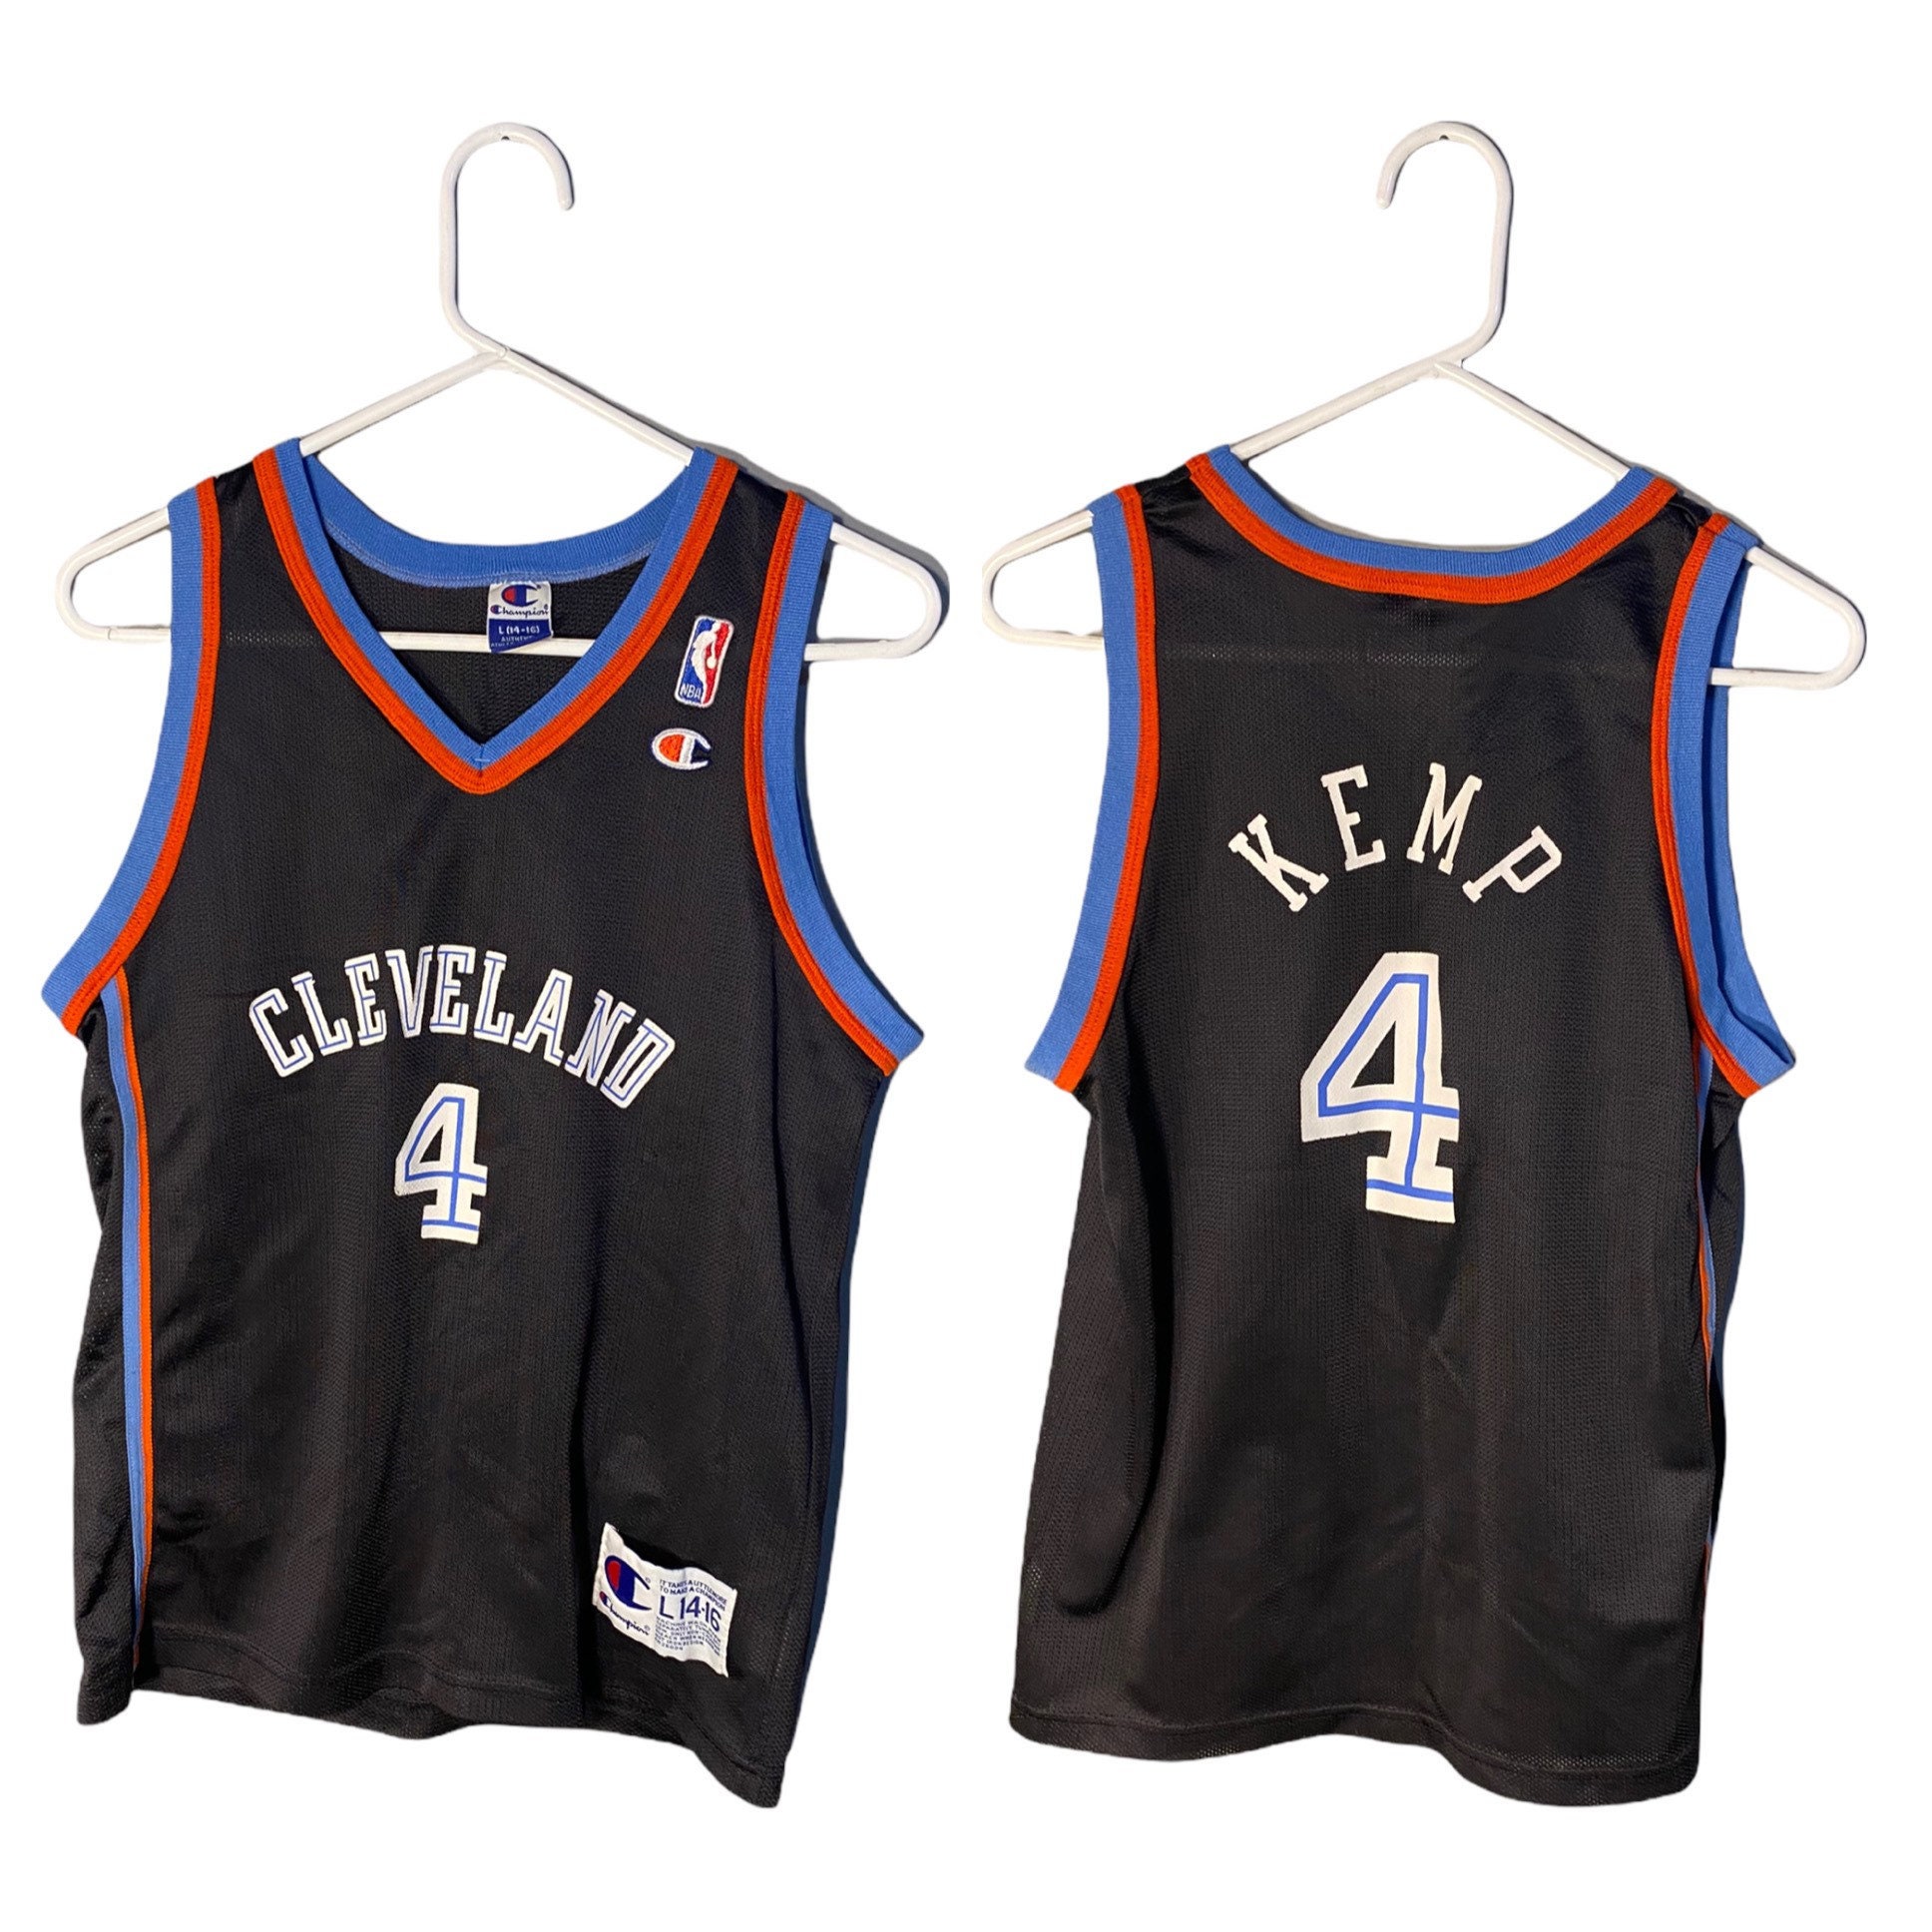 Vintage Champion 90s Cleveland Cavaliers Basketball Jersey X